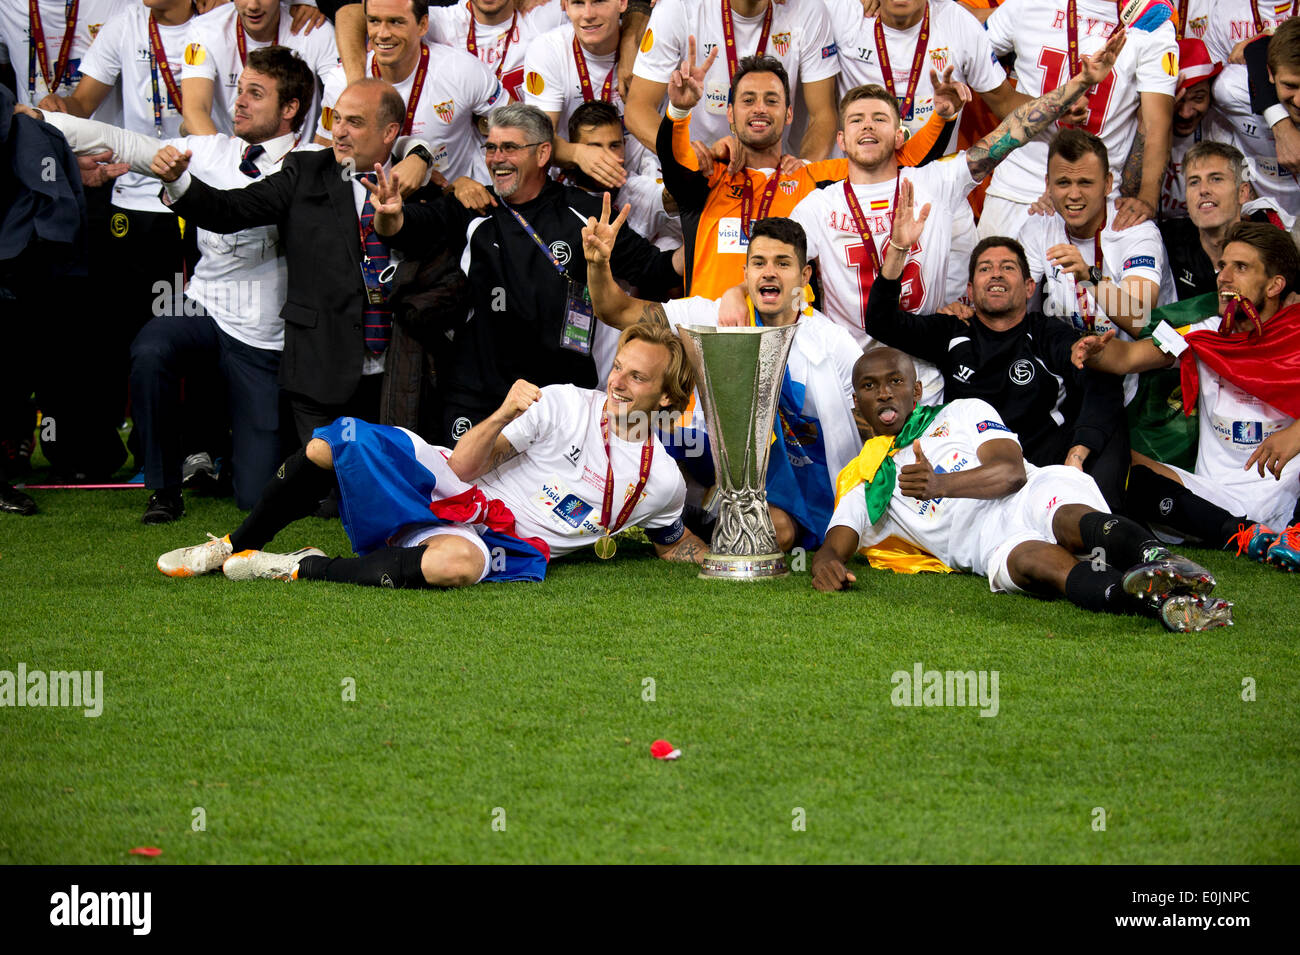 Turin, Italy. 14th May, 2014. Sevilla team group Football/Soccer : Ivan Rakitic and Steephane Mbia of Sevilla celebrate with the trophy after winning the UEFA Europa League Final match between Sevilla FC 0(4-2)0 SL Benfica at Juventus Stadium in Turin, Italy . © Maurizio Borsari/AFLO/Alamy Live News Stock Photo